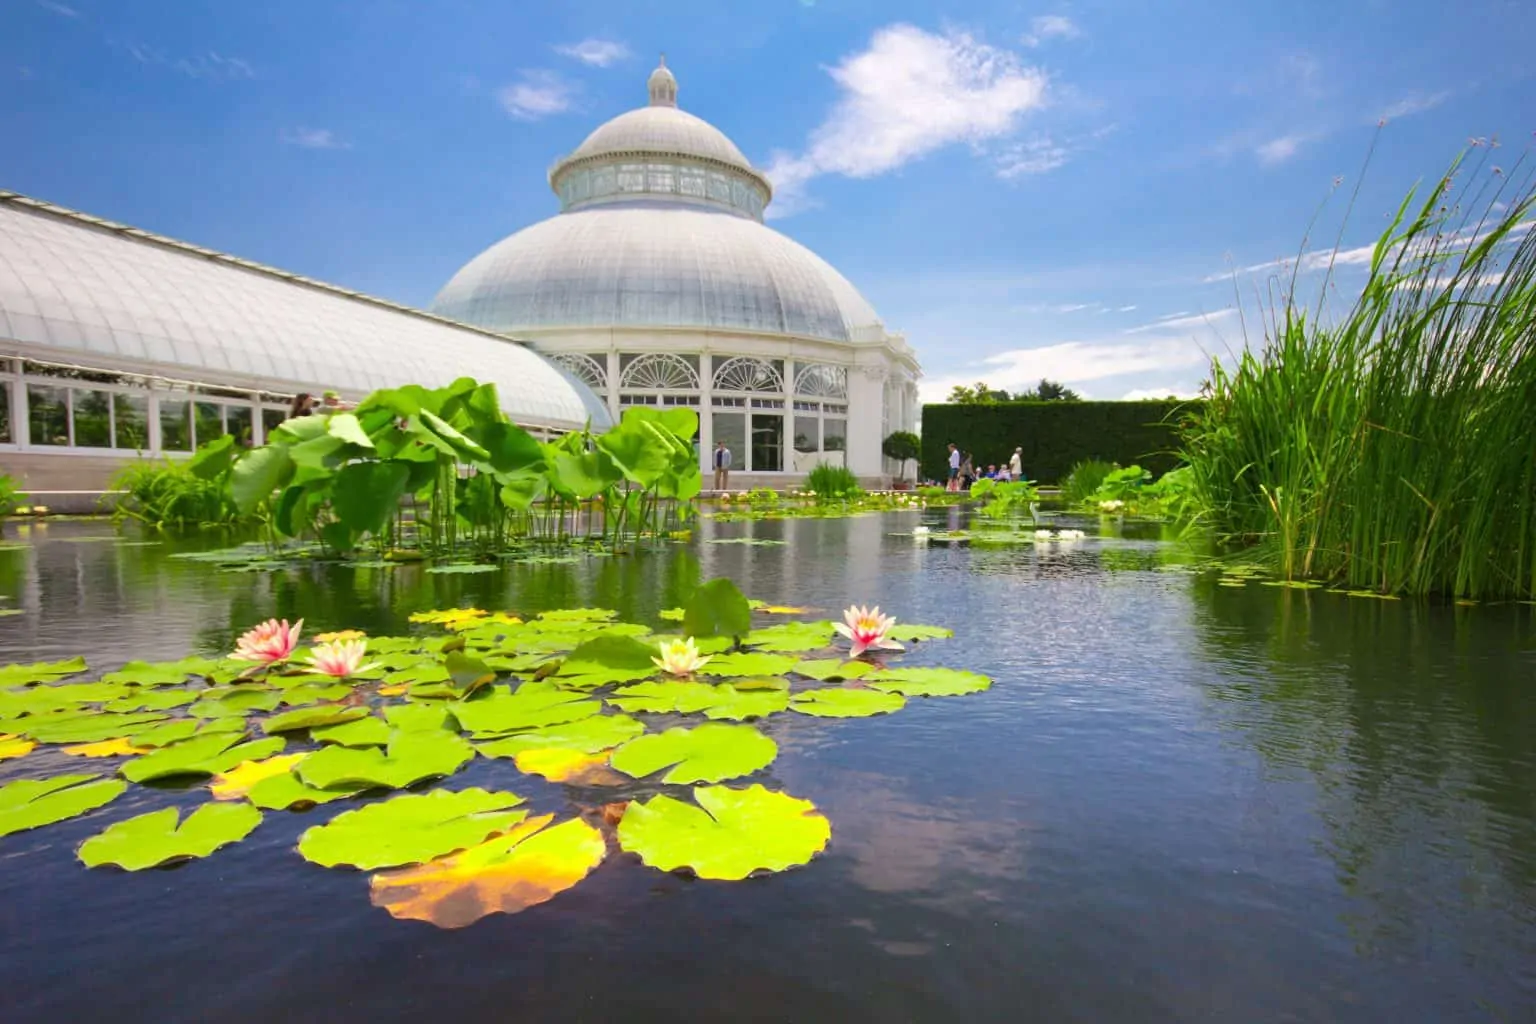 Historic pavilion at the New York Botanical Gardens surrounded by a pond with lily pads.